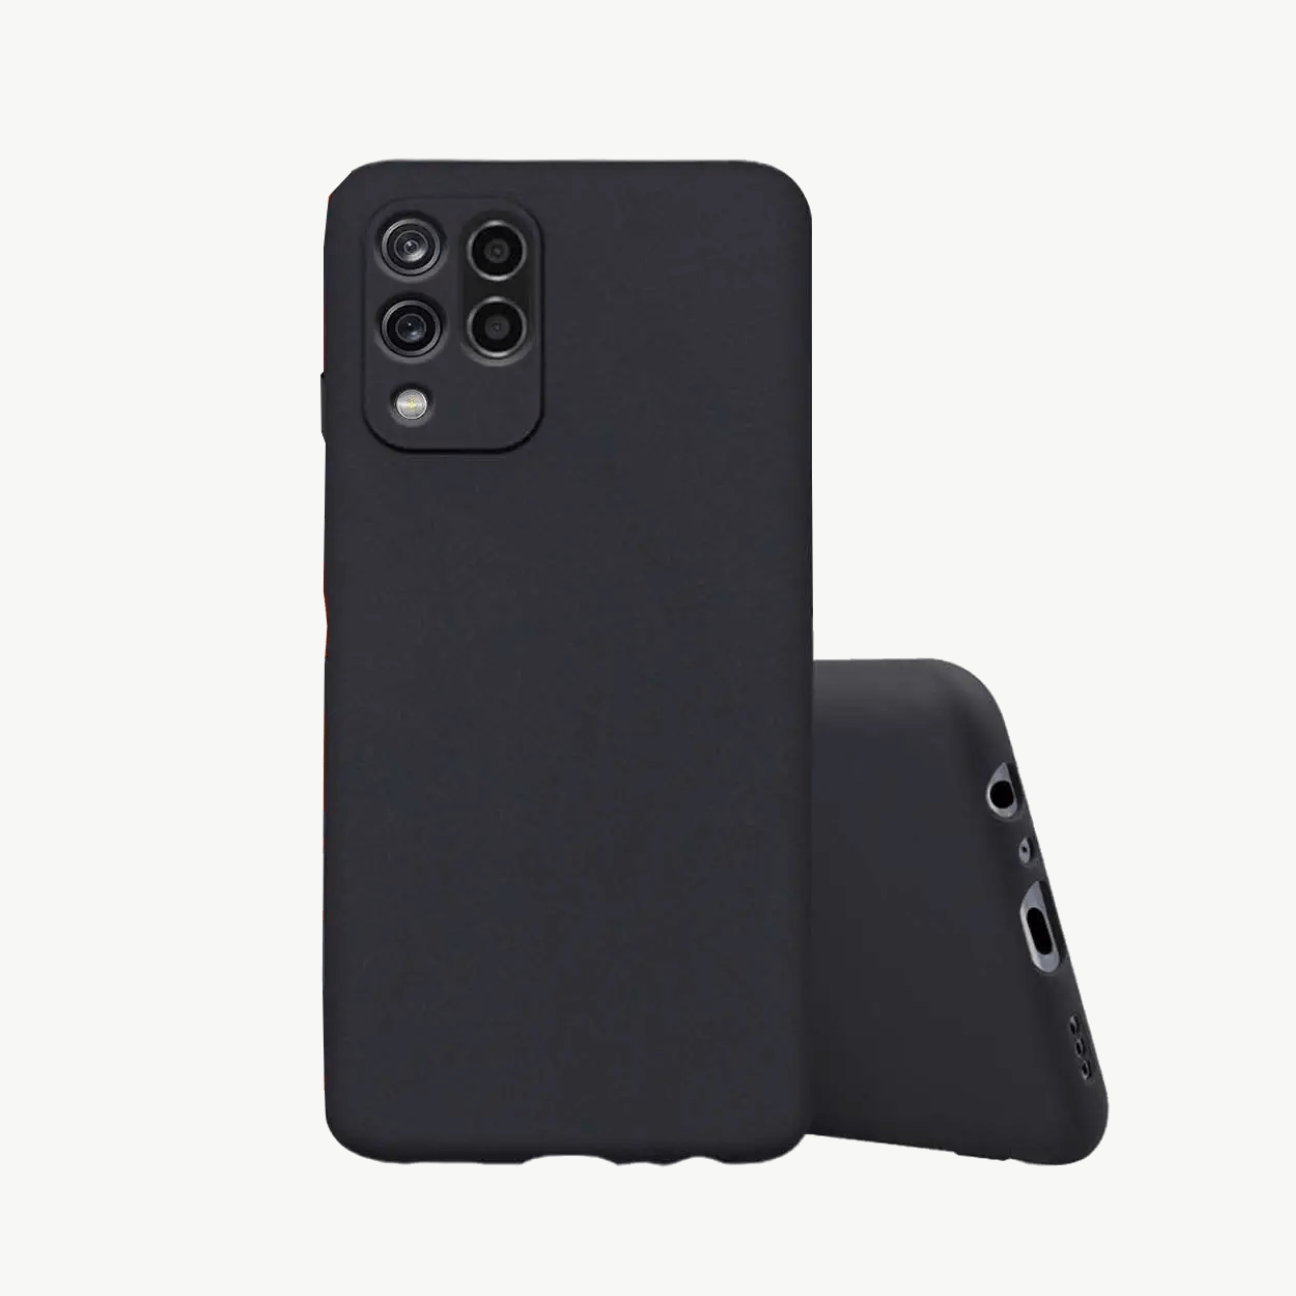 Oppo A11K (2020) Black Soft Silicone Phone Case